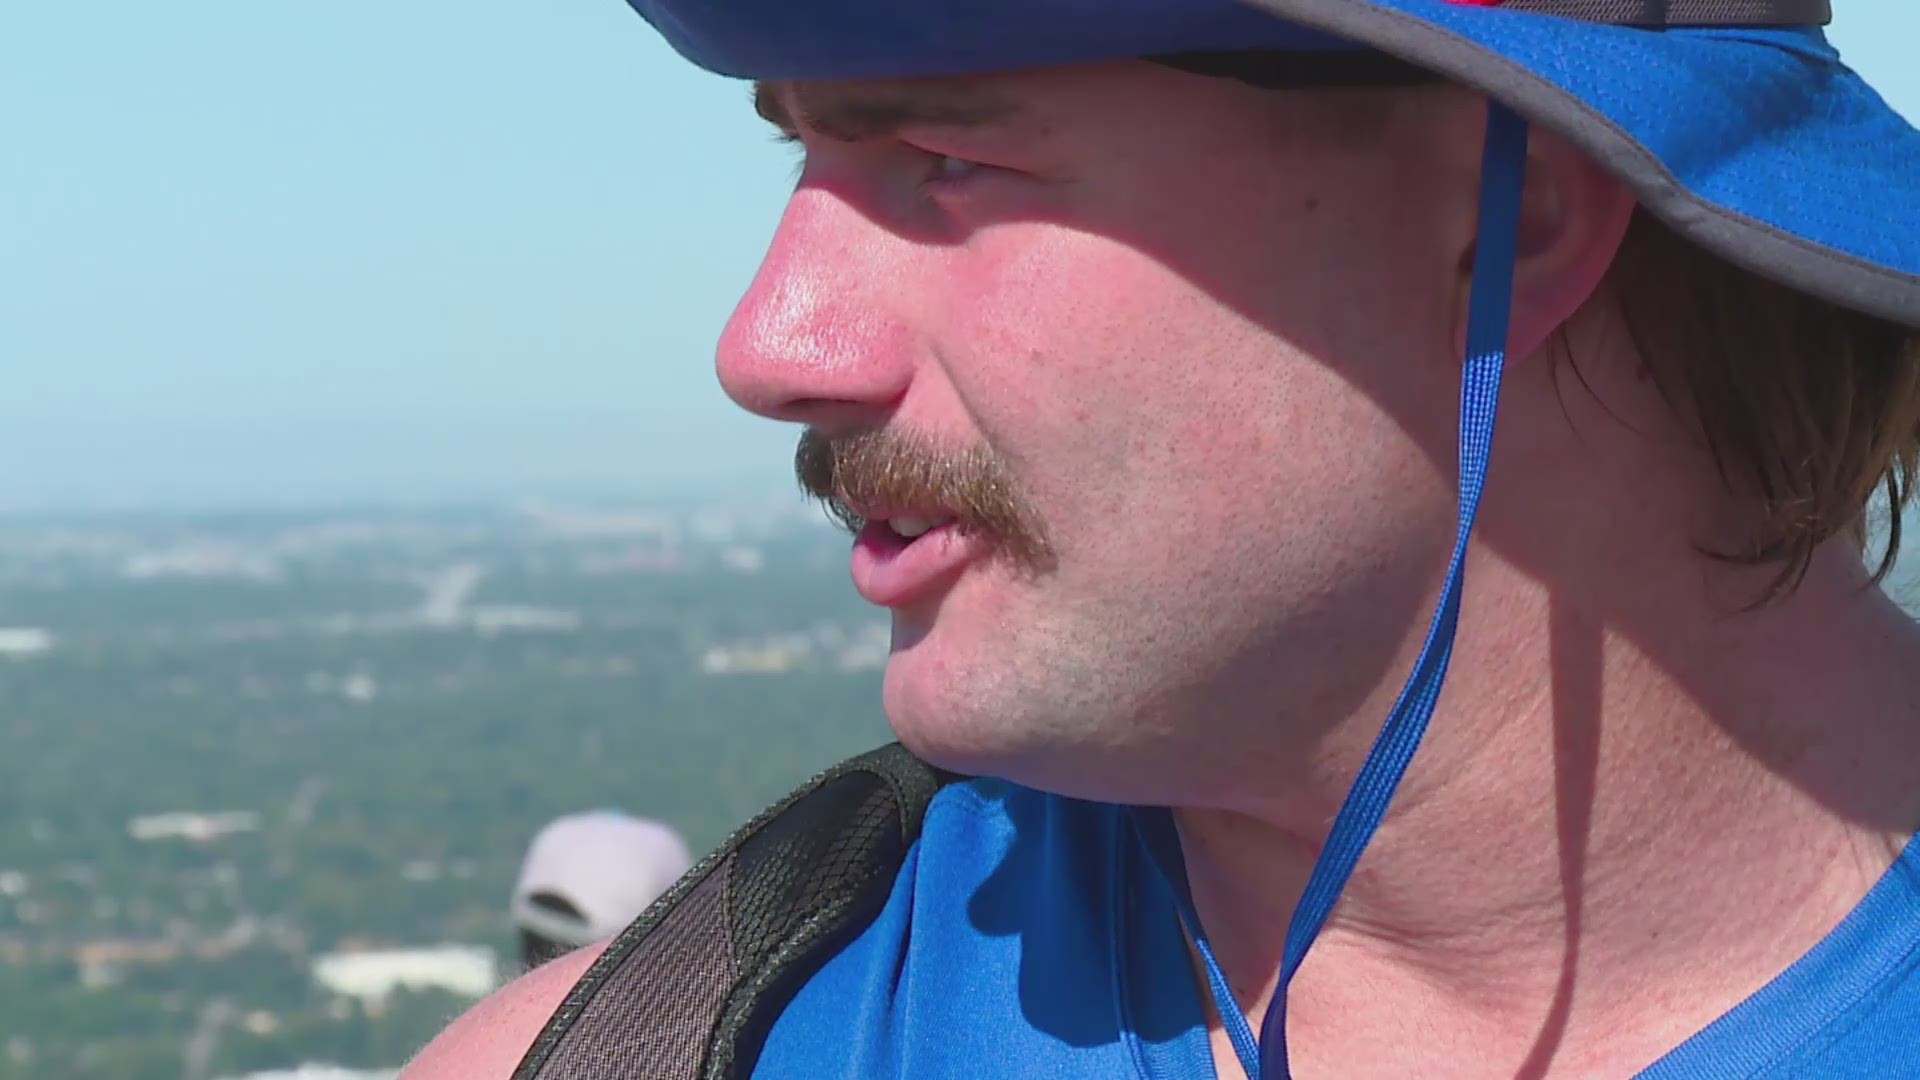 Boise State senior offensive lineman John Molchon stopped and talked with KTVB Sports Director at the top of Table Rock about the end of fall camp.